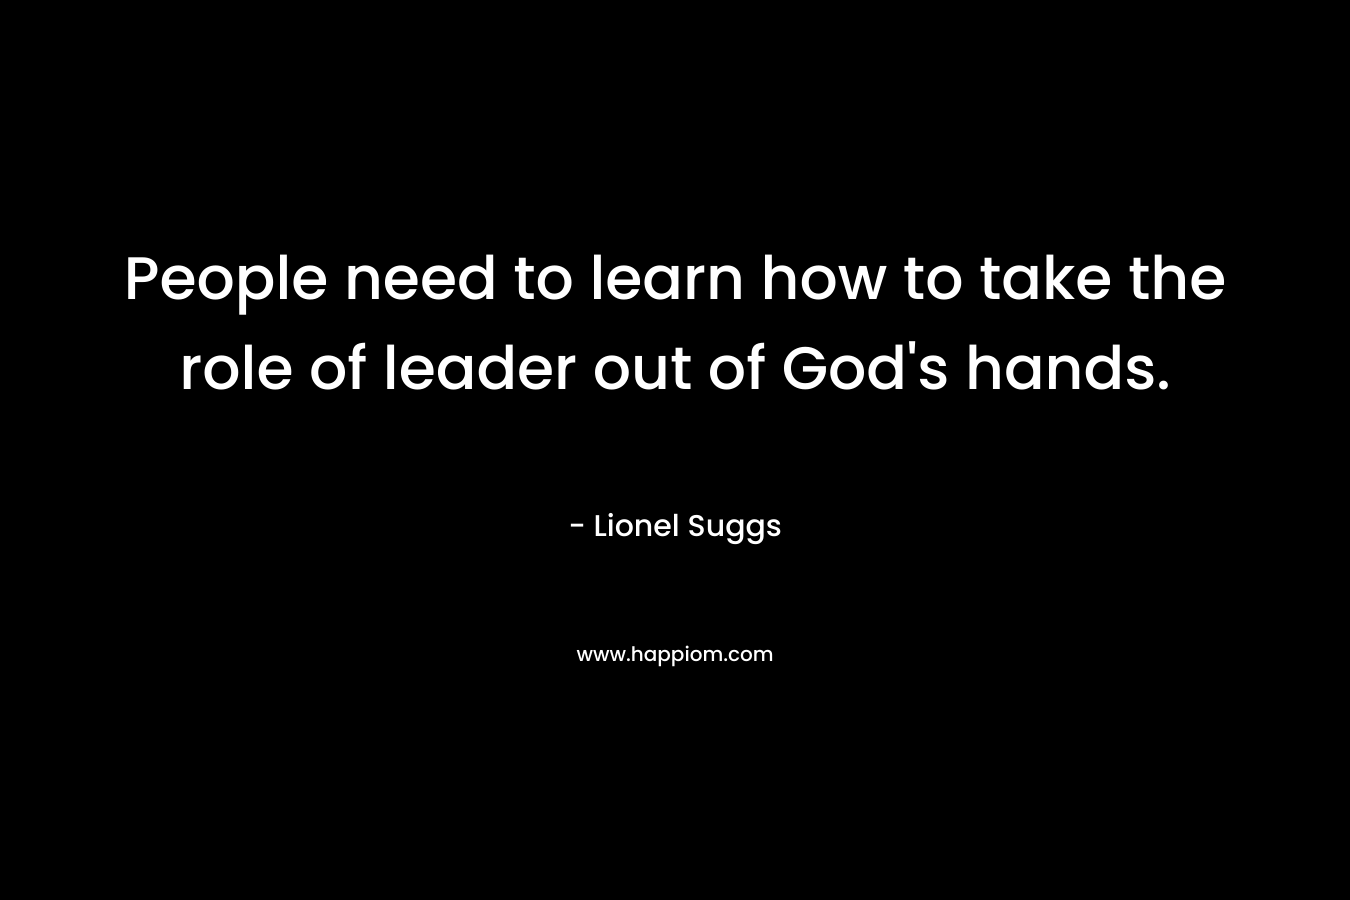 People need to learn how to take the role of leader out of God’s hands. – Lionel Suggs